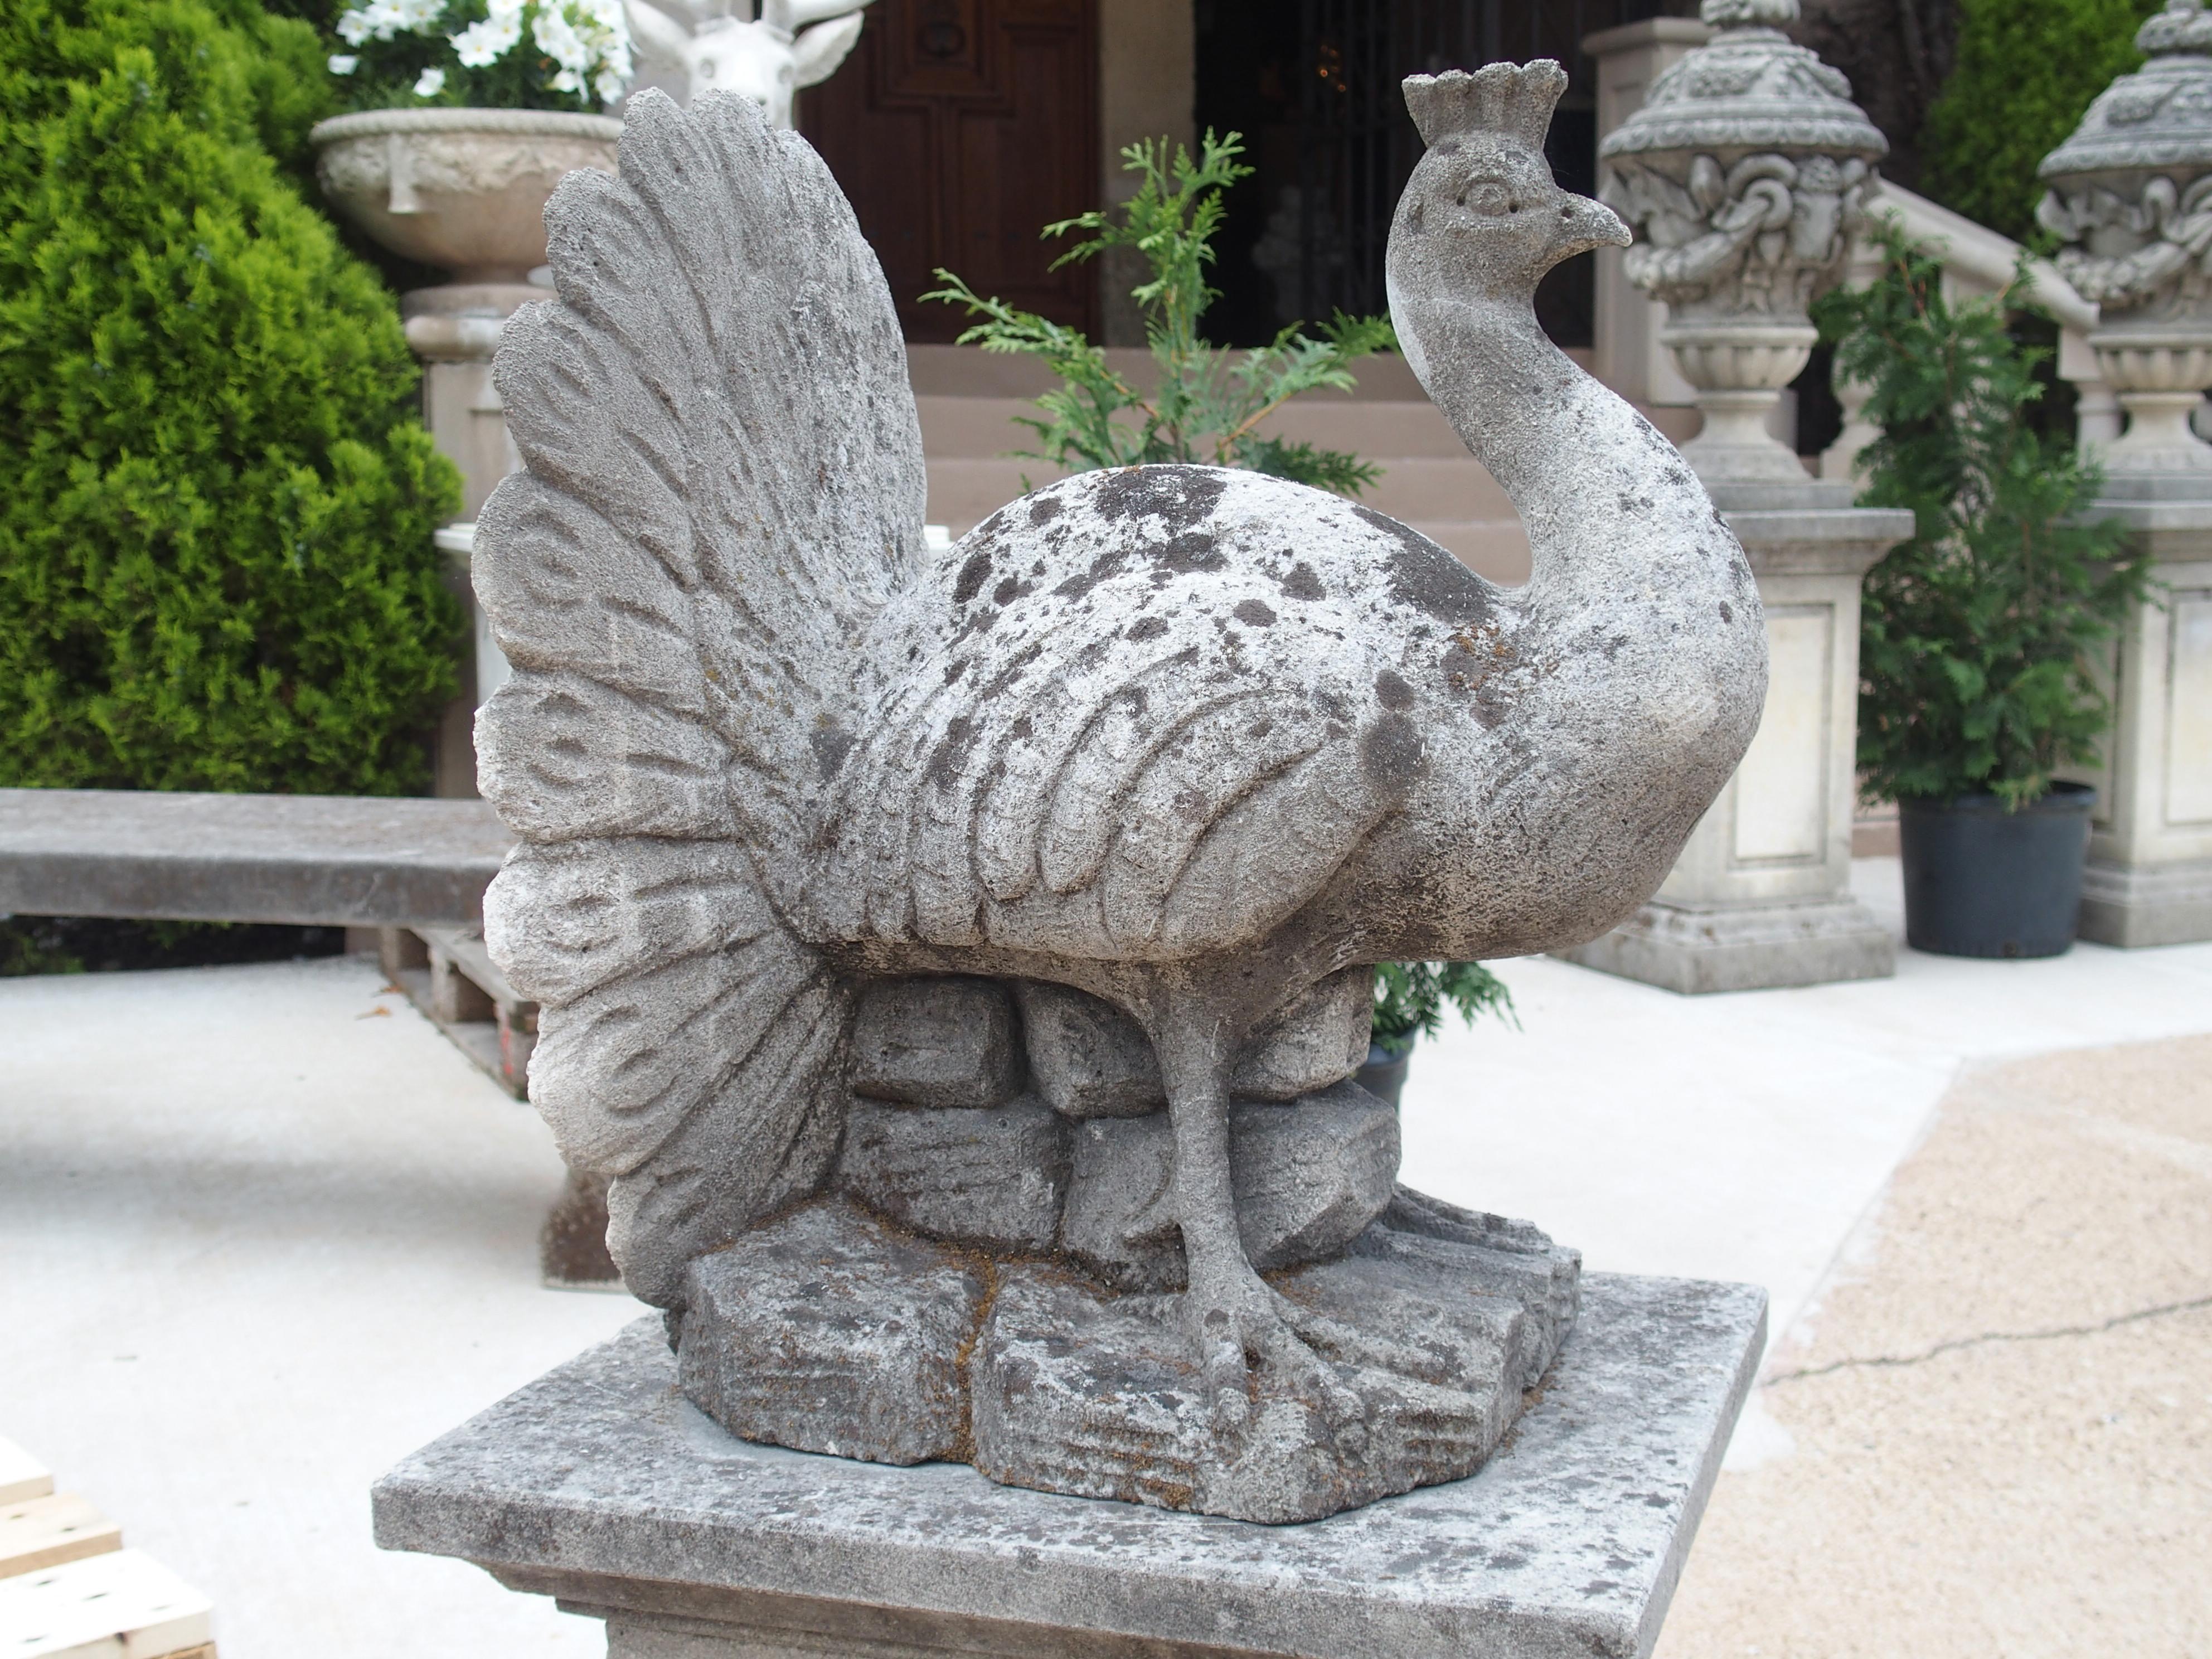 Hand carved in Italy in the early 2000’s, this limestone peacock sits on a classic rectangular plinth. Our proud peacock is shown displaying his tail feathers in the typical fan shape while standing on a rocky outcrop. The carved plinth has panels